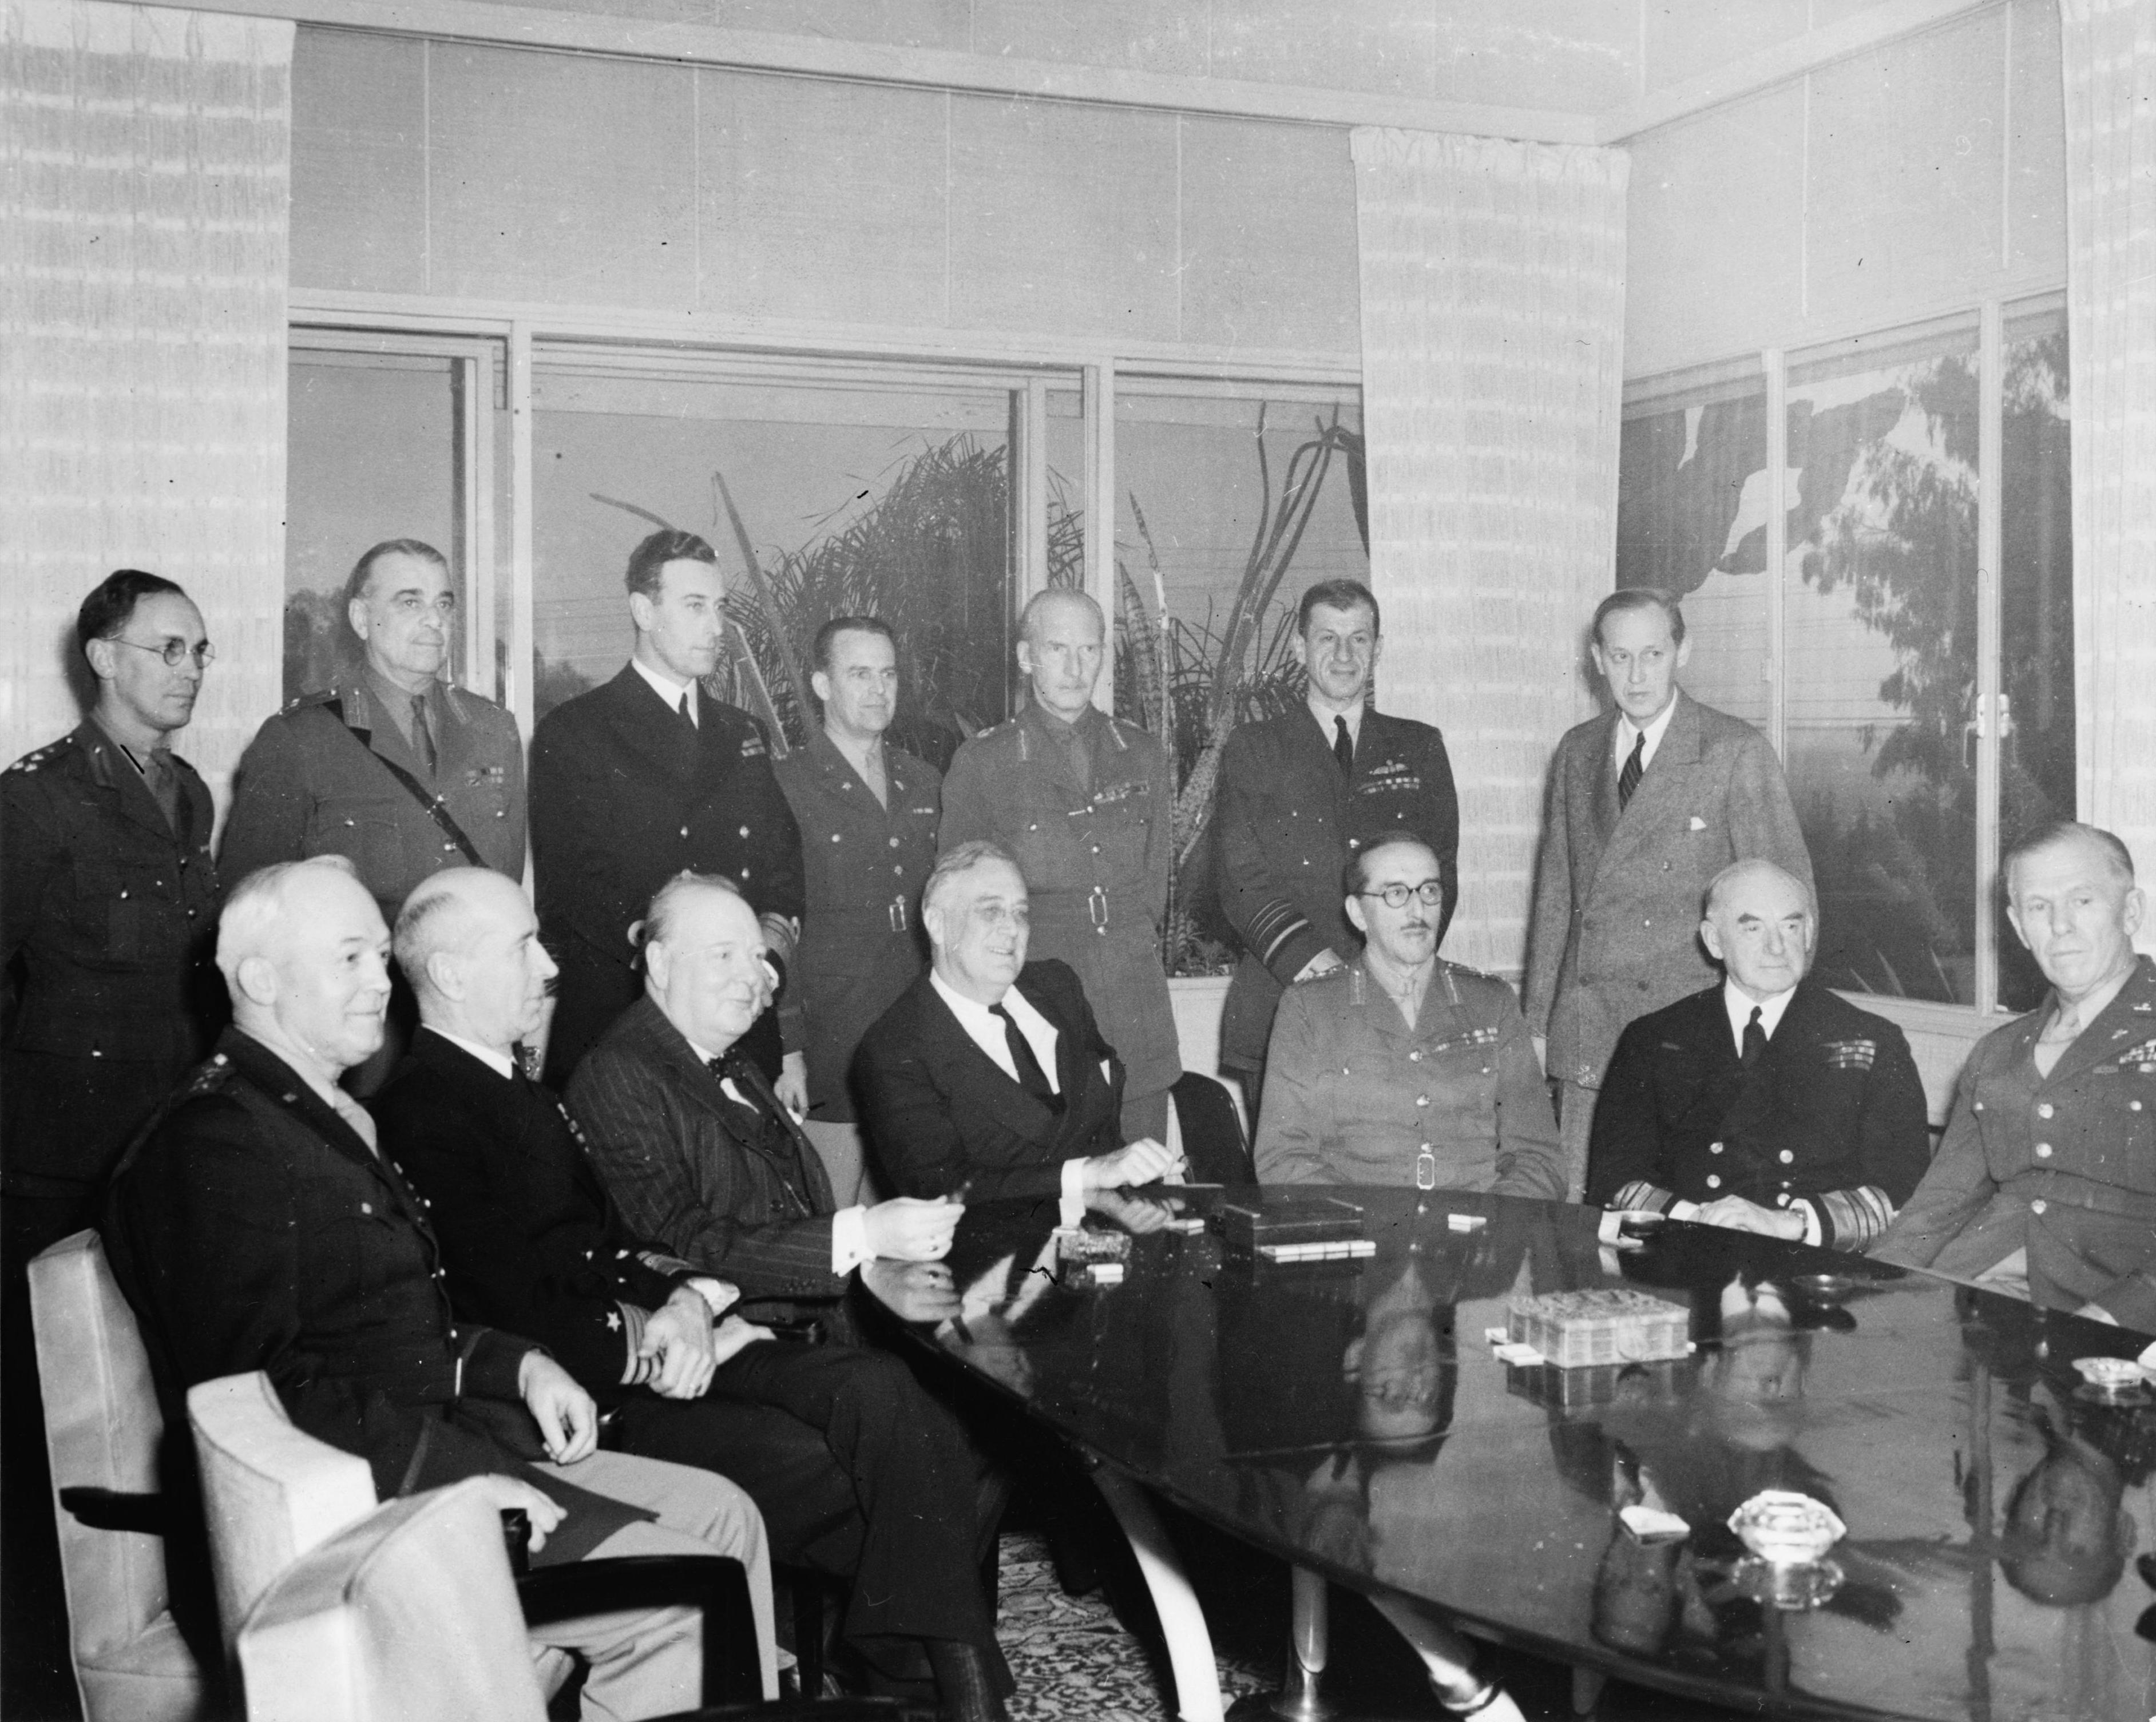 President Franklin Roosevelt and Prime Minister Churchill confer with the Combined Chiefs of Staff during the Casablanca Conference at Roosevelt’s Dar es Saada villa in Casablanca, French Morocco, 18 Jan 1943.